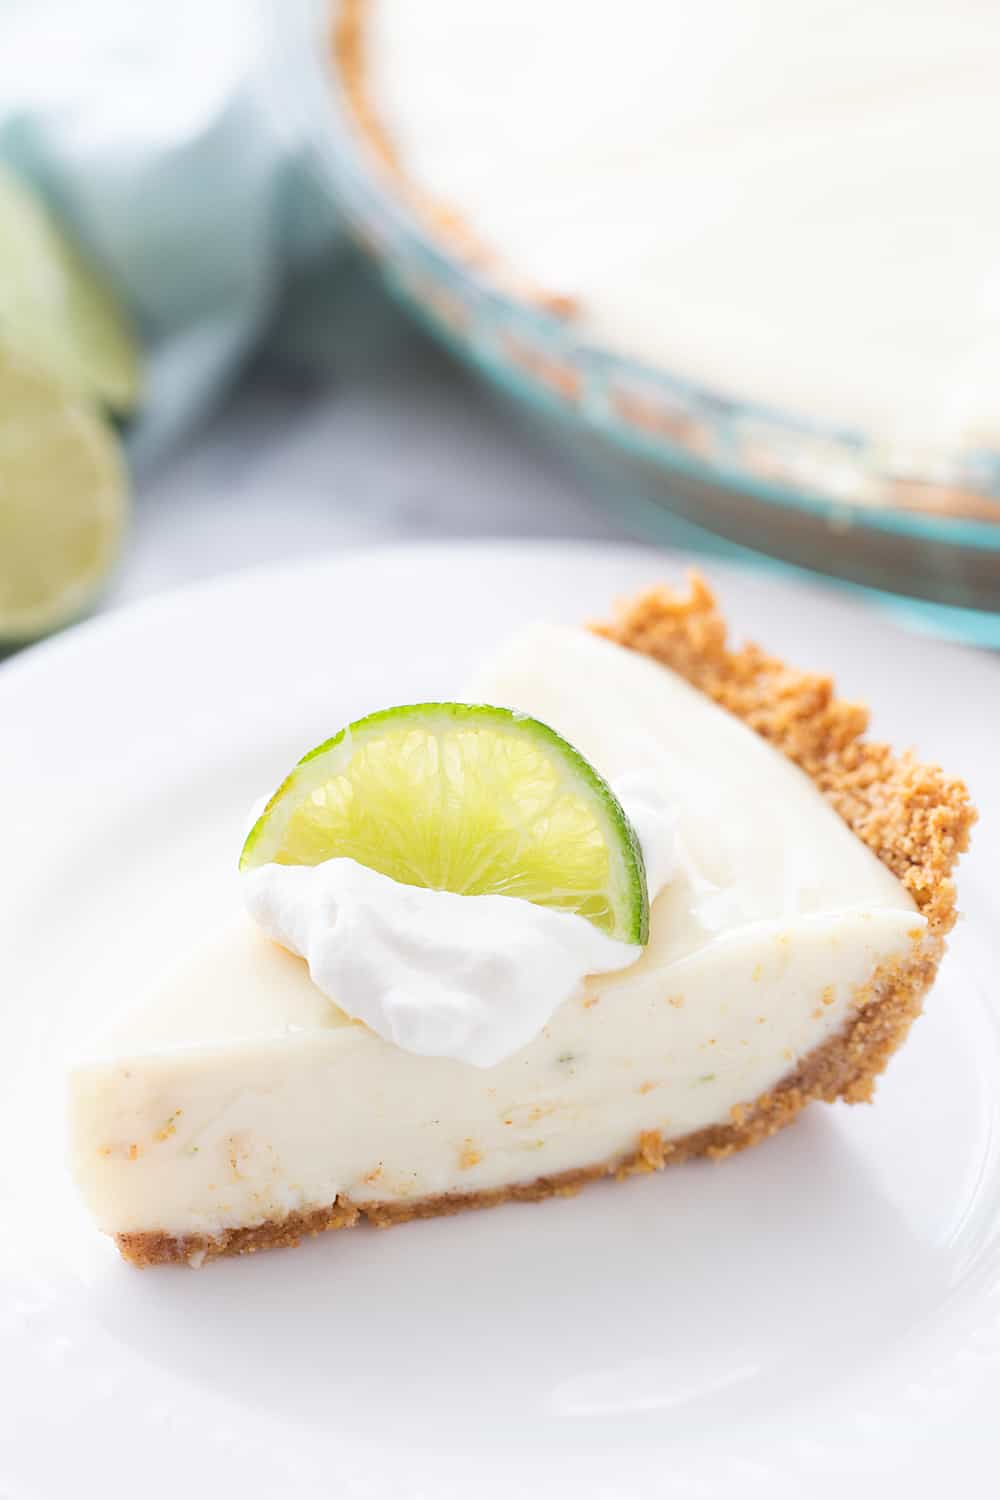 Easy Key Lime Pie with Homemade Whipped Cream - This easy key lime pie calls for a homemade graham cracker crust and the easiest pie filling ever. Top it with homemade whipped cream and it's always a hit! #keylime #keylimepie #whippedcream #dessert #baking #pie #lime #halfscratched